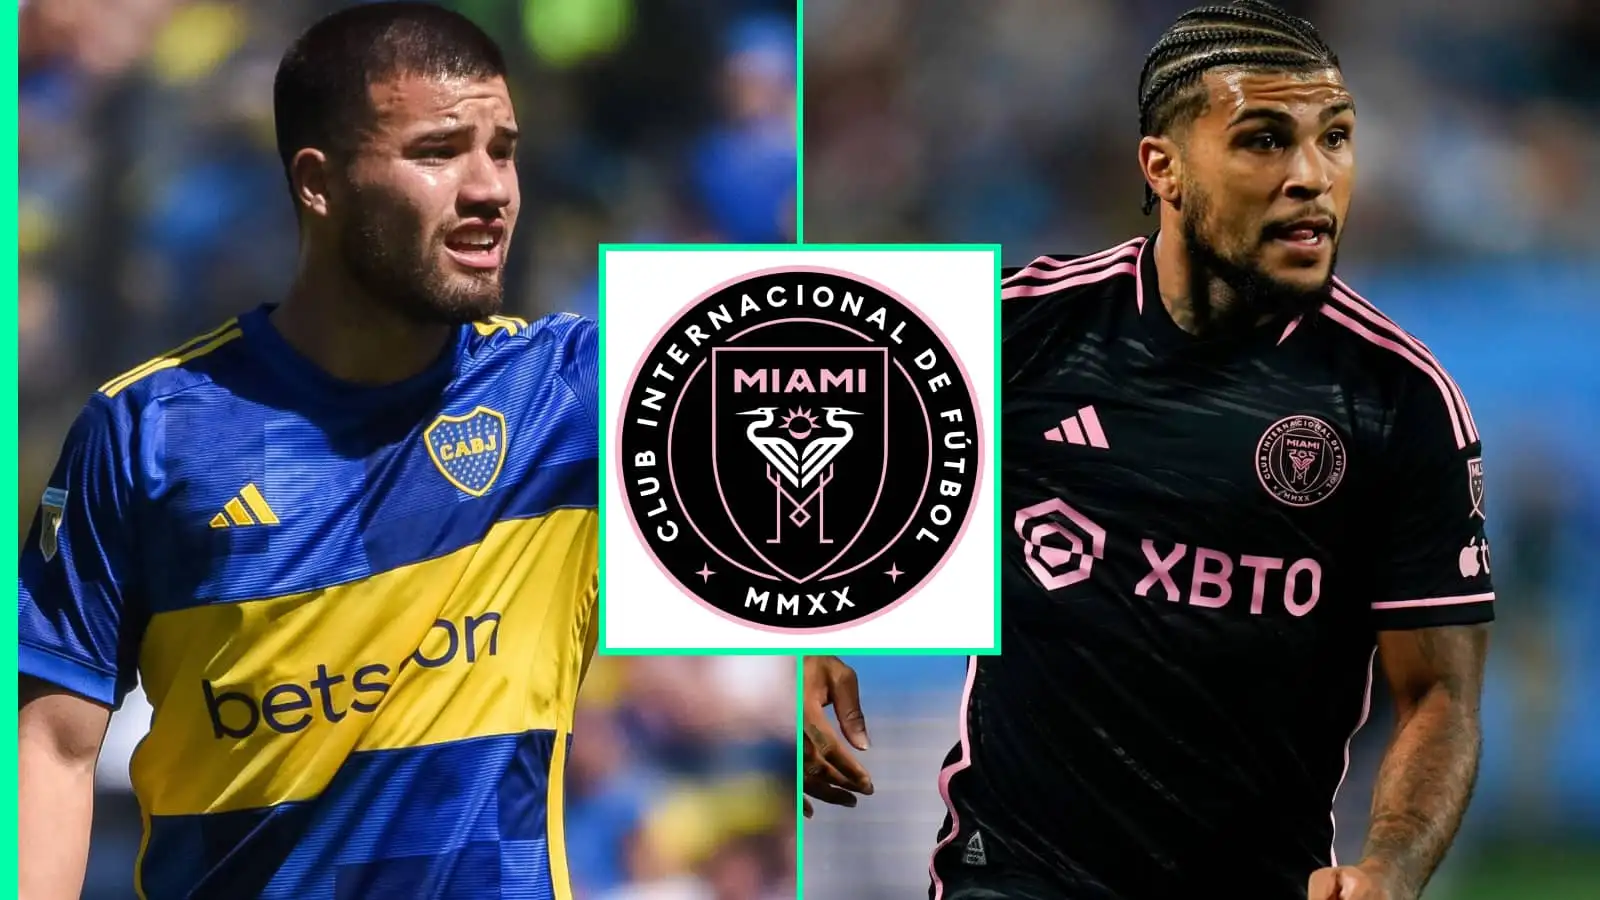 Inter Miami heavy Argentine influx continues in move for Boca Juniors full-back to replace Yedlin